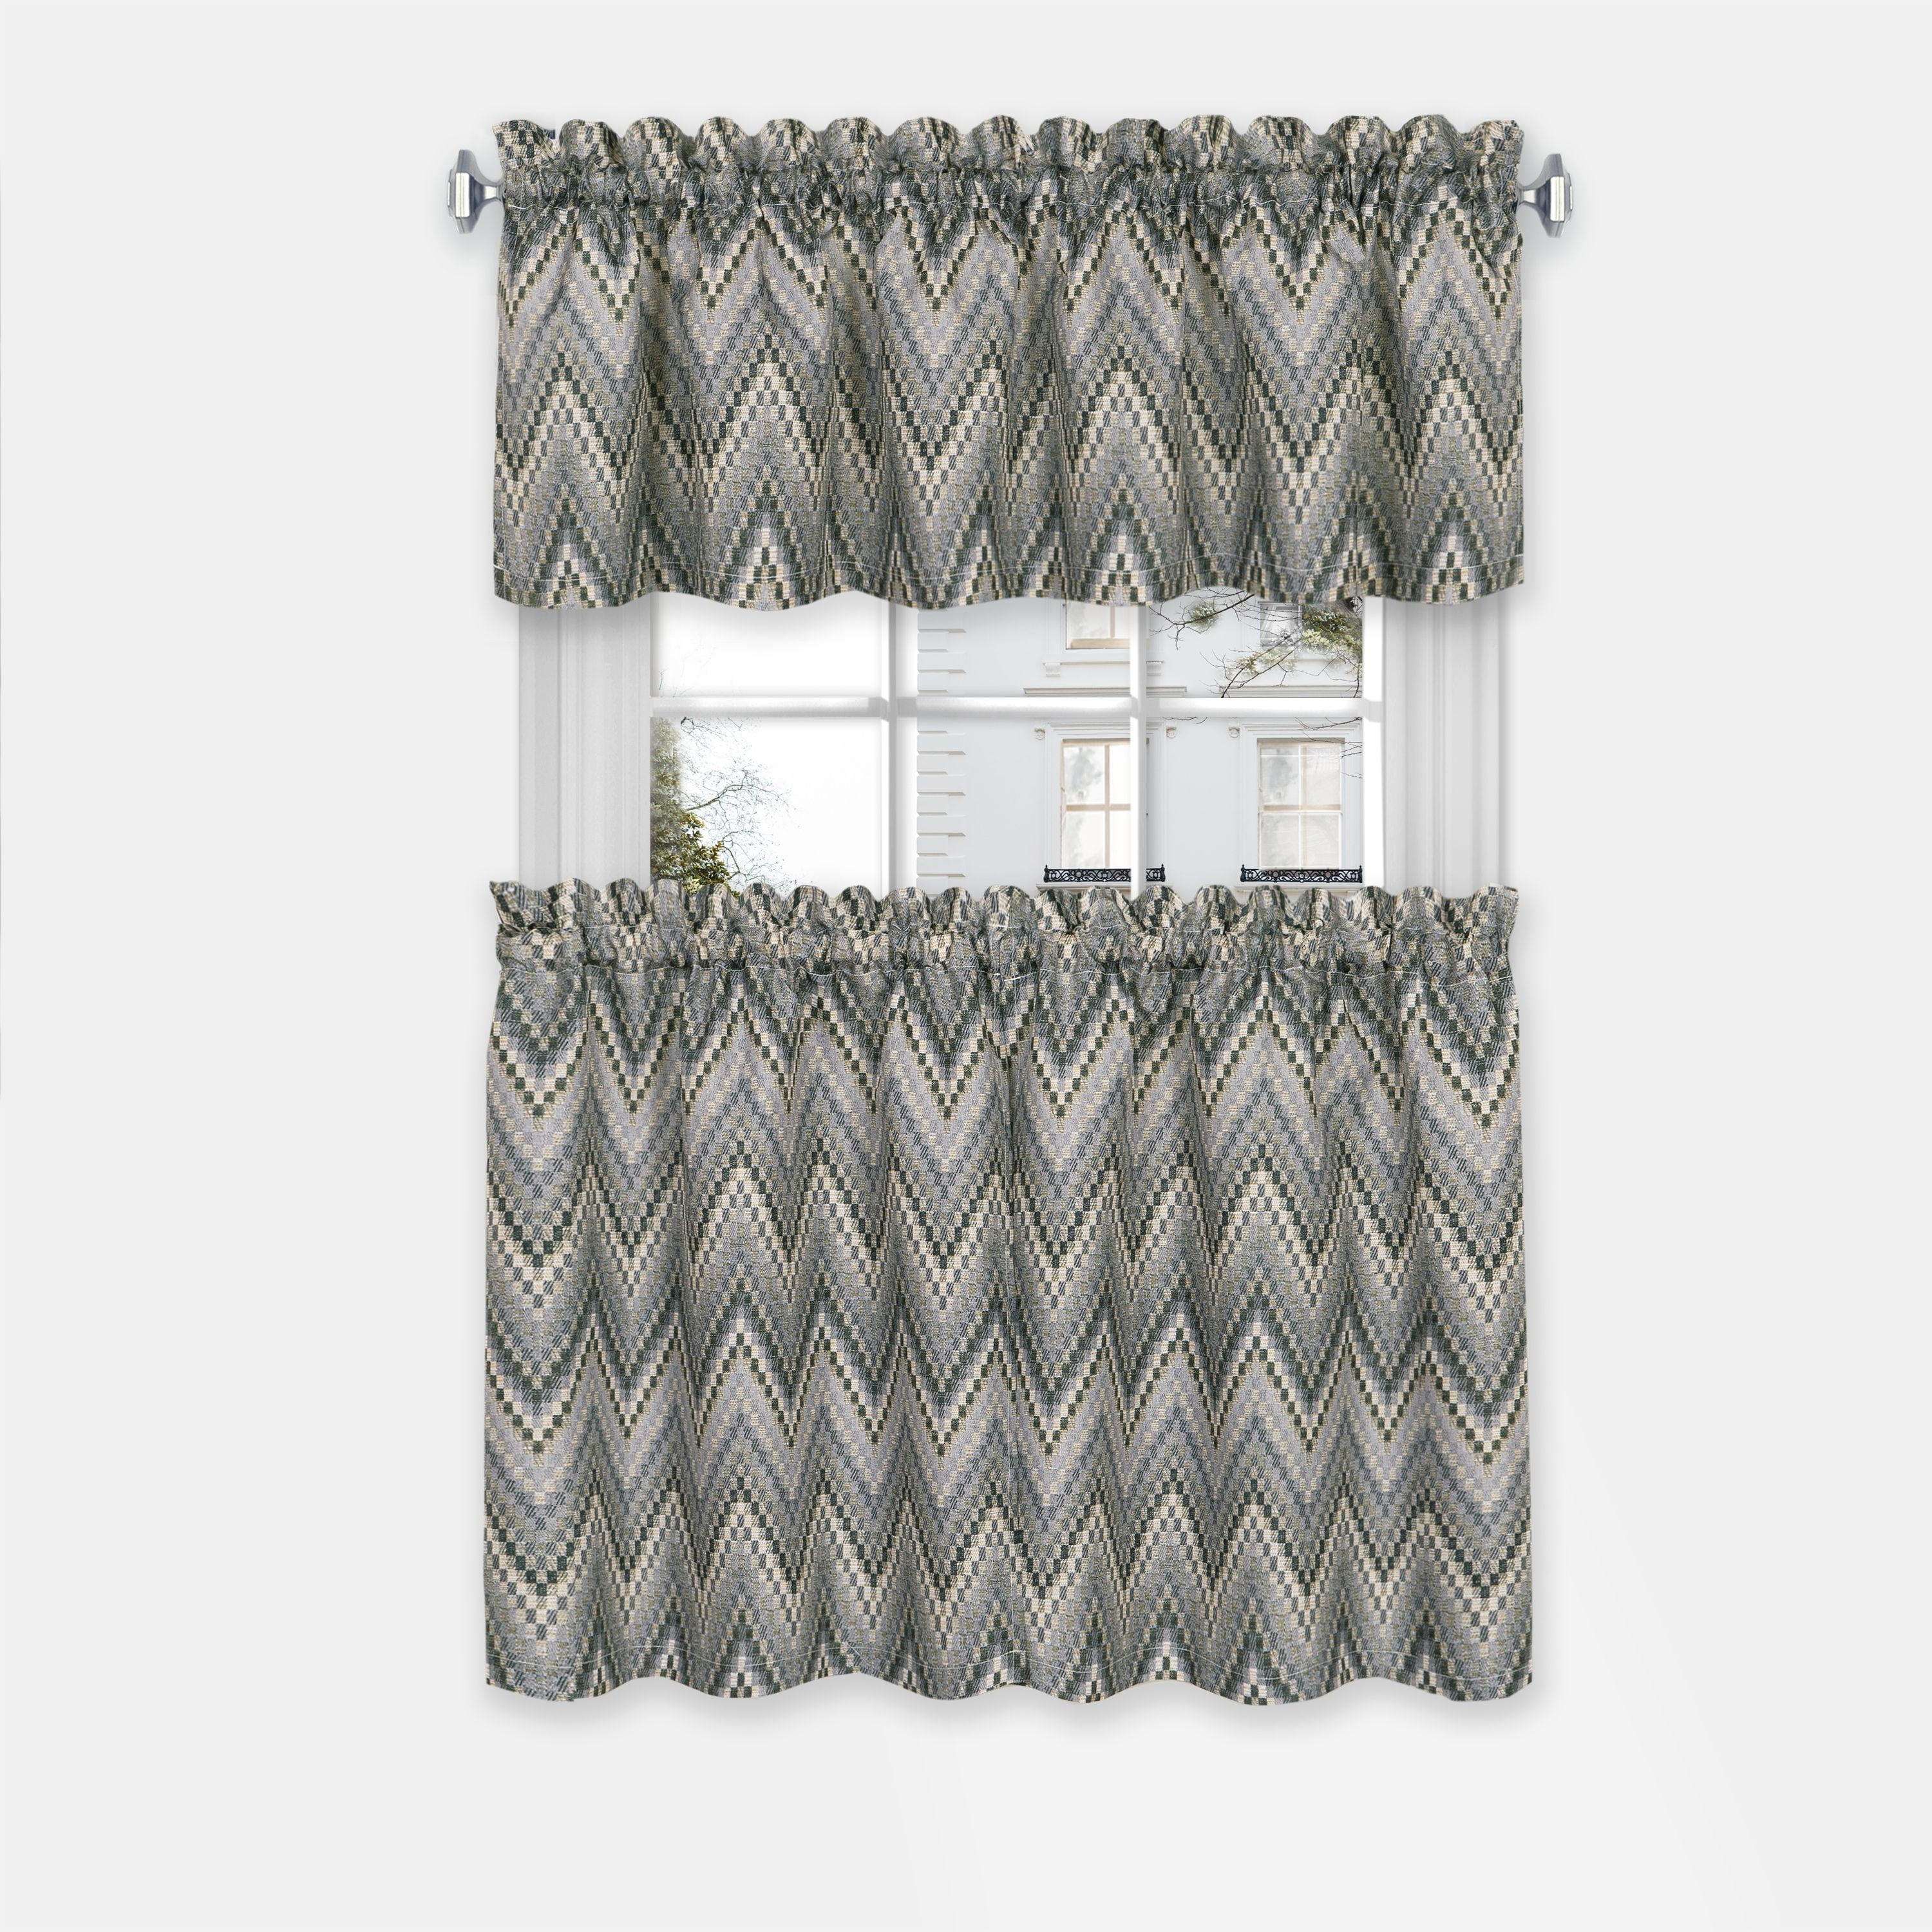 Achim Avtv36cc12 58 X 36 In. Avery Window Curtain Tier & Valance Set, Charcoal - Pack Of 2